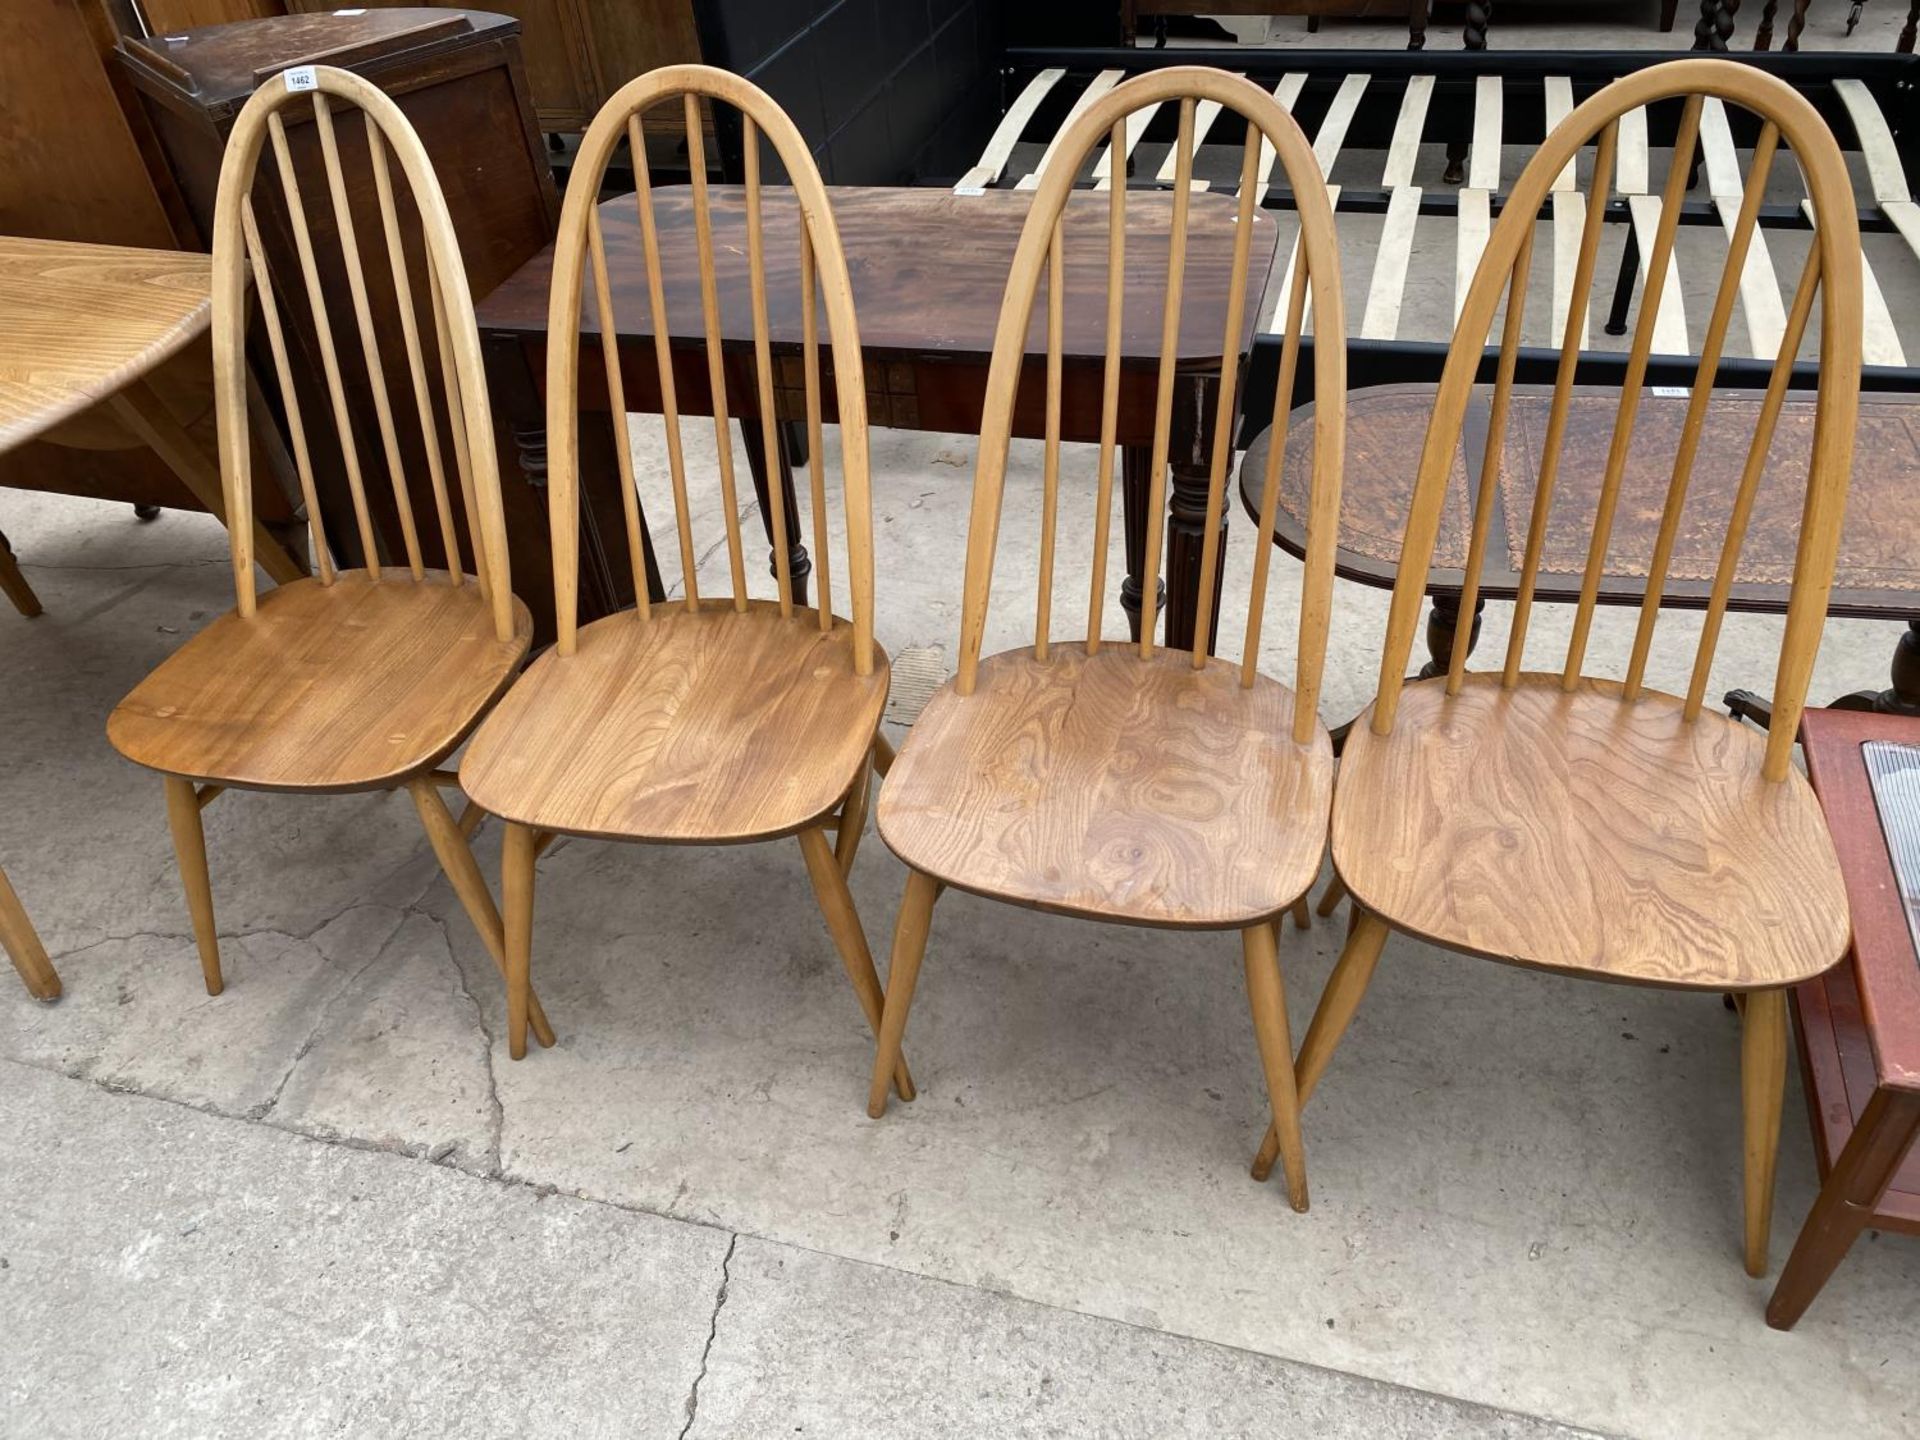 FOUR ERCOL ELM AND BEECH DINING CHAIRS